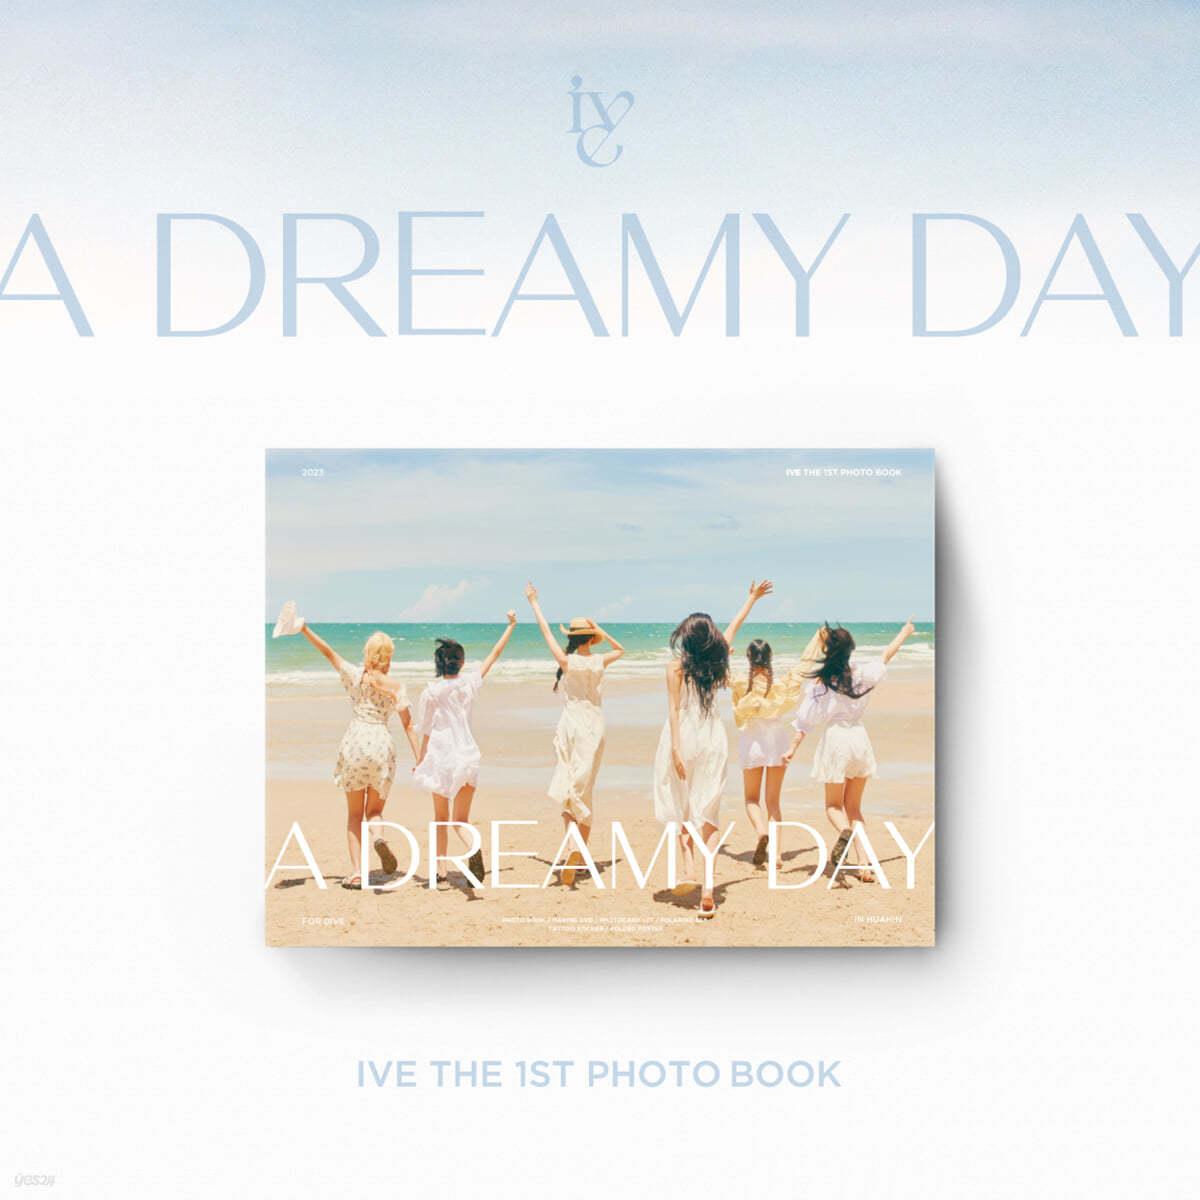 IVE - THE 1ST PHOTOBOOK [A DREAMY DAY] - KKANG